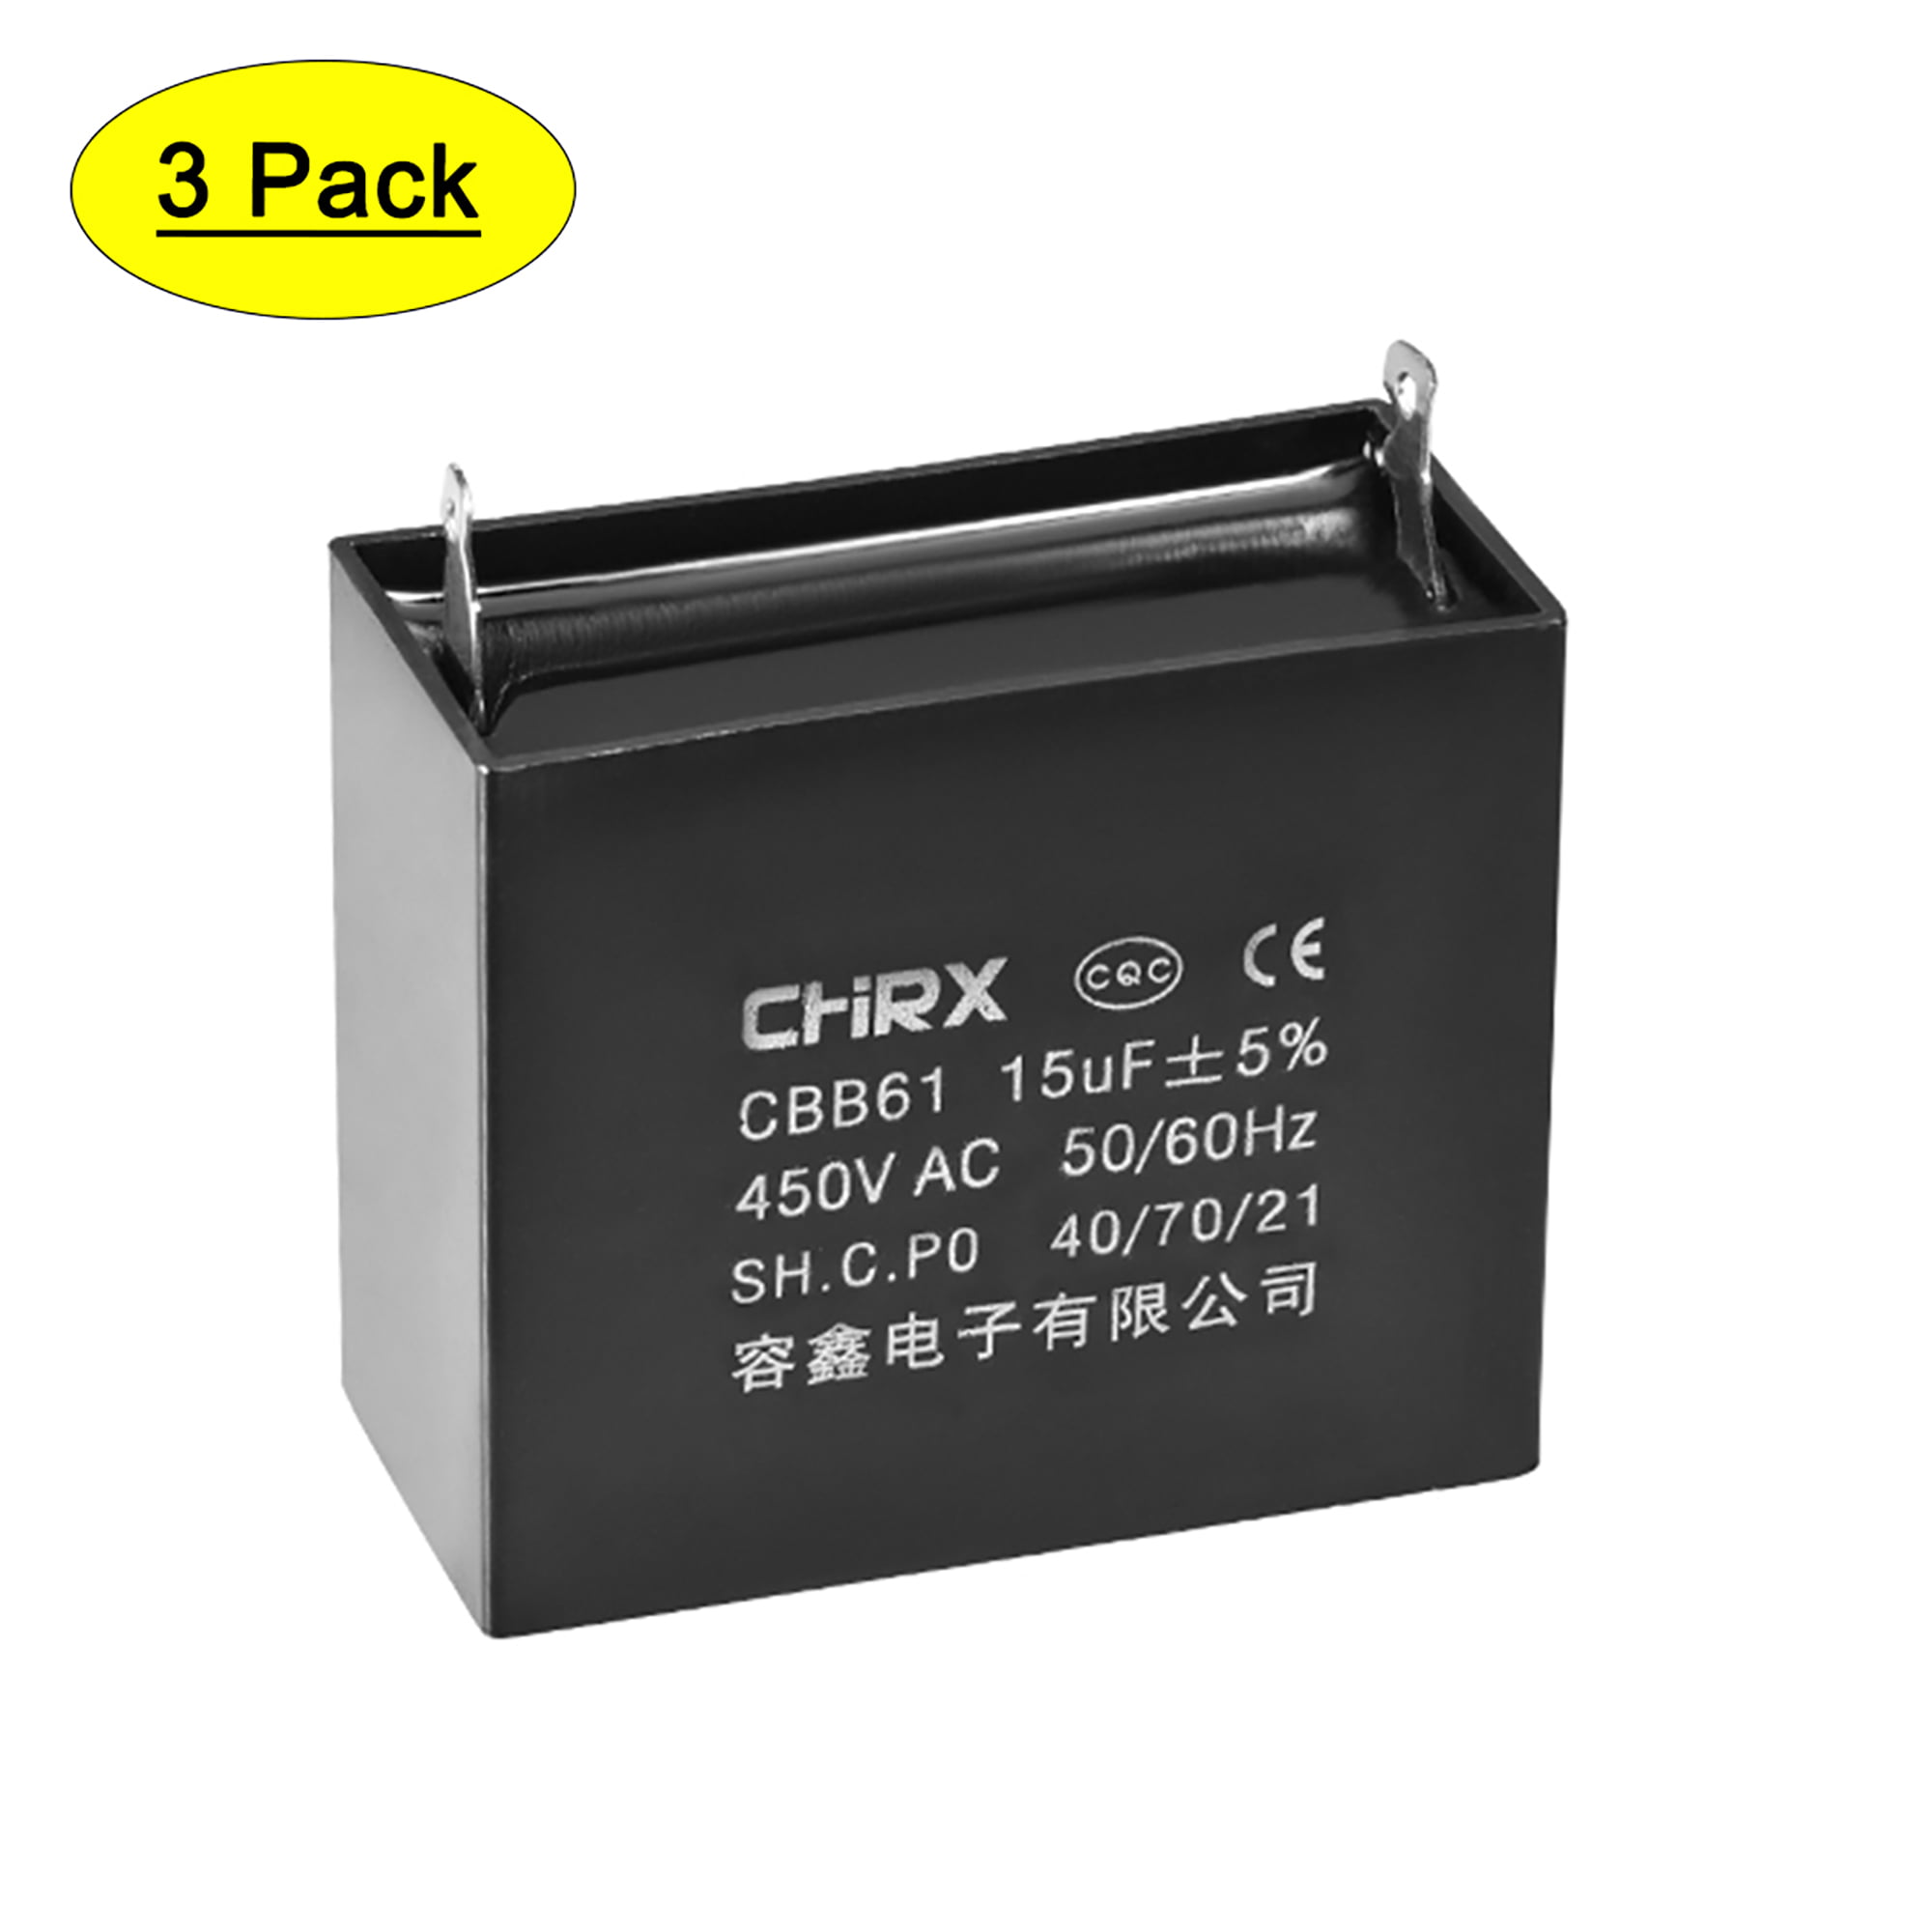 uxcell CBB61 Run Capacitor 450V AC 10uF 2 Insert Metallized Polypropylene Film Capacitors for Ceiling Fan 